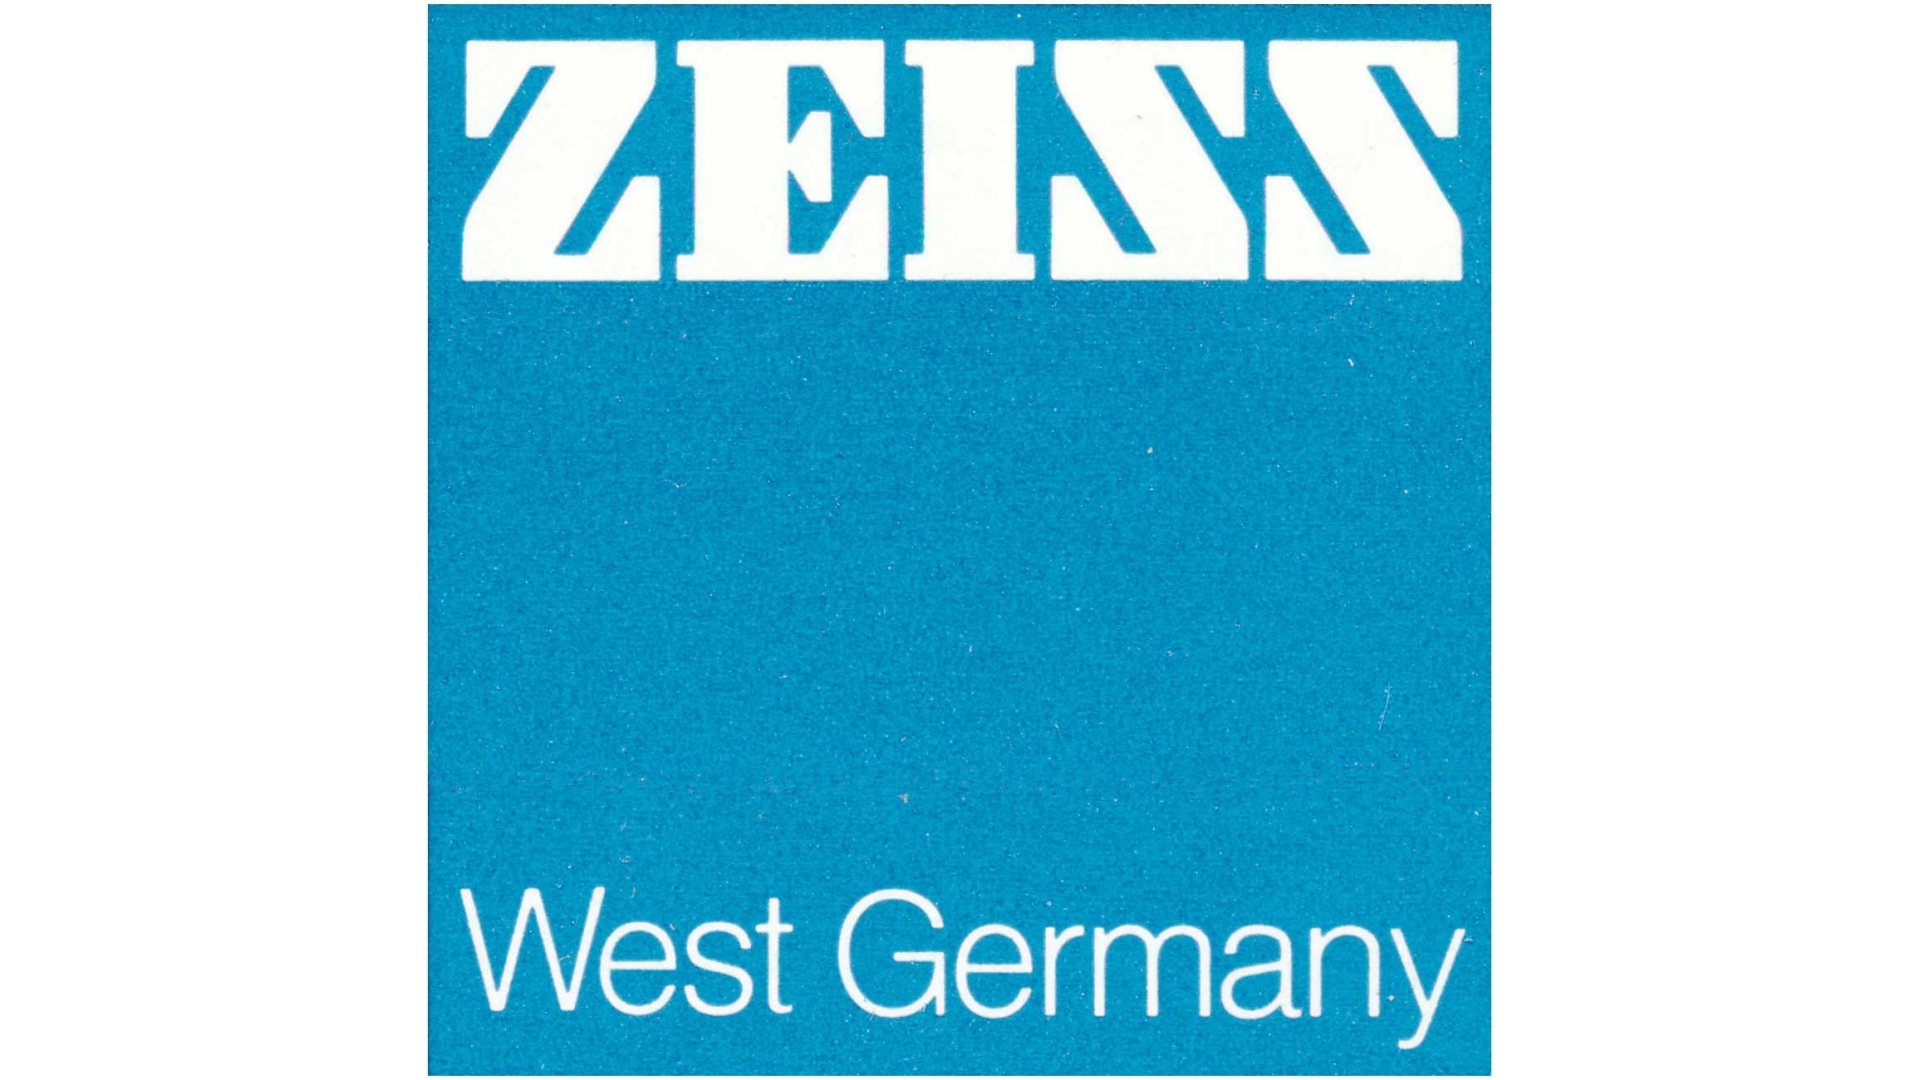 ZEISS in a square with West Germany at the bottom